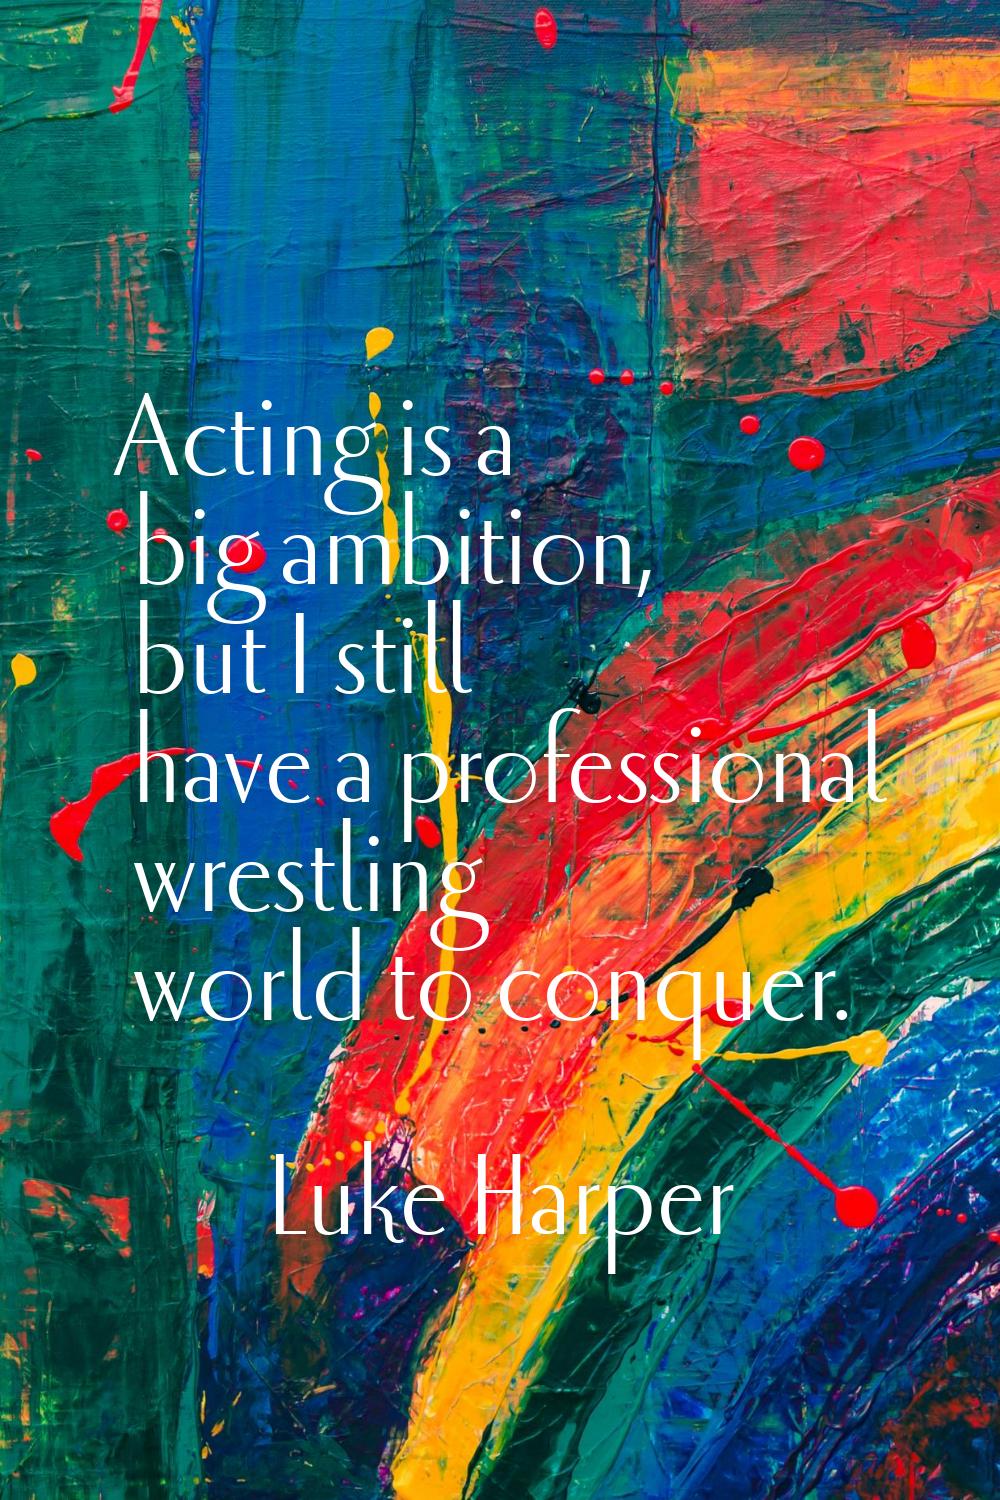 Acting is a big ambition, but I still have a professional wrestling world to conquer.